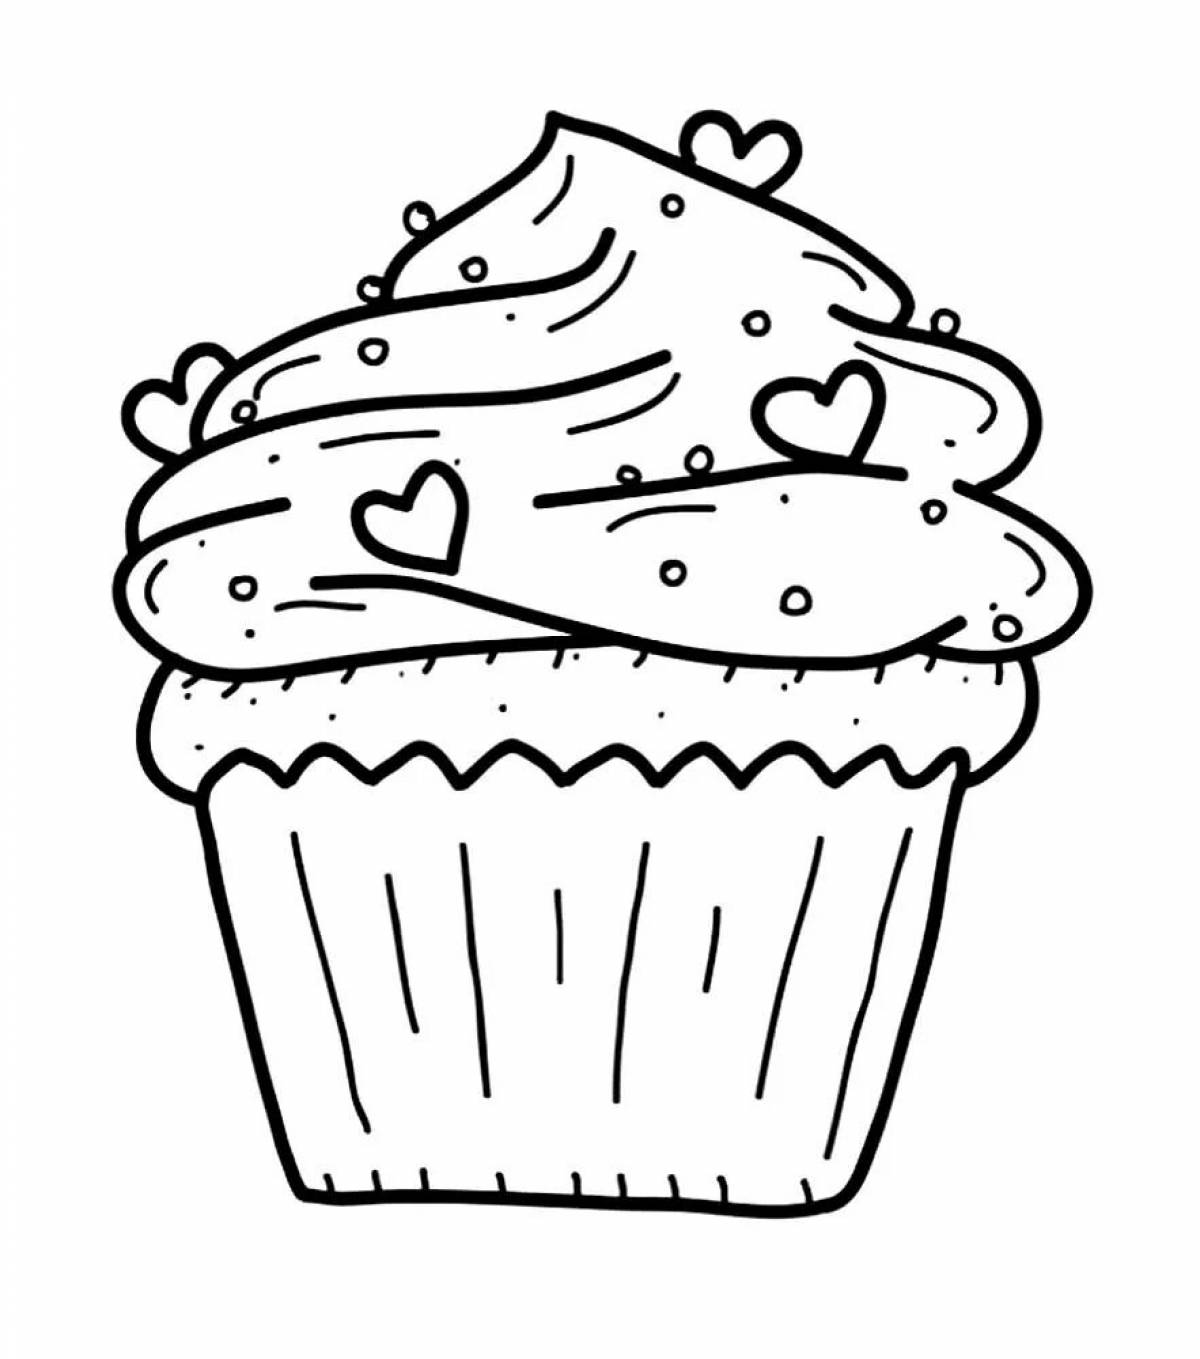 Cupcake coloring page in color